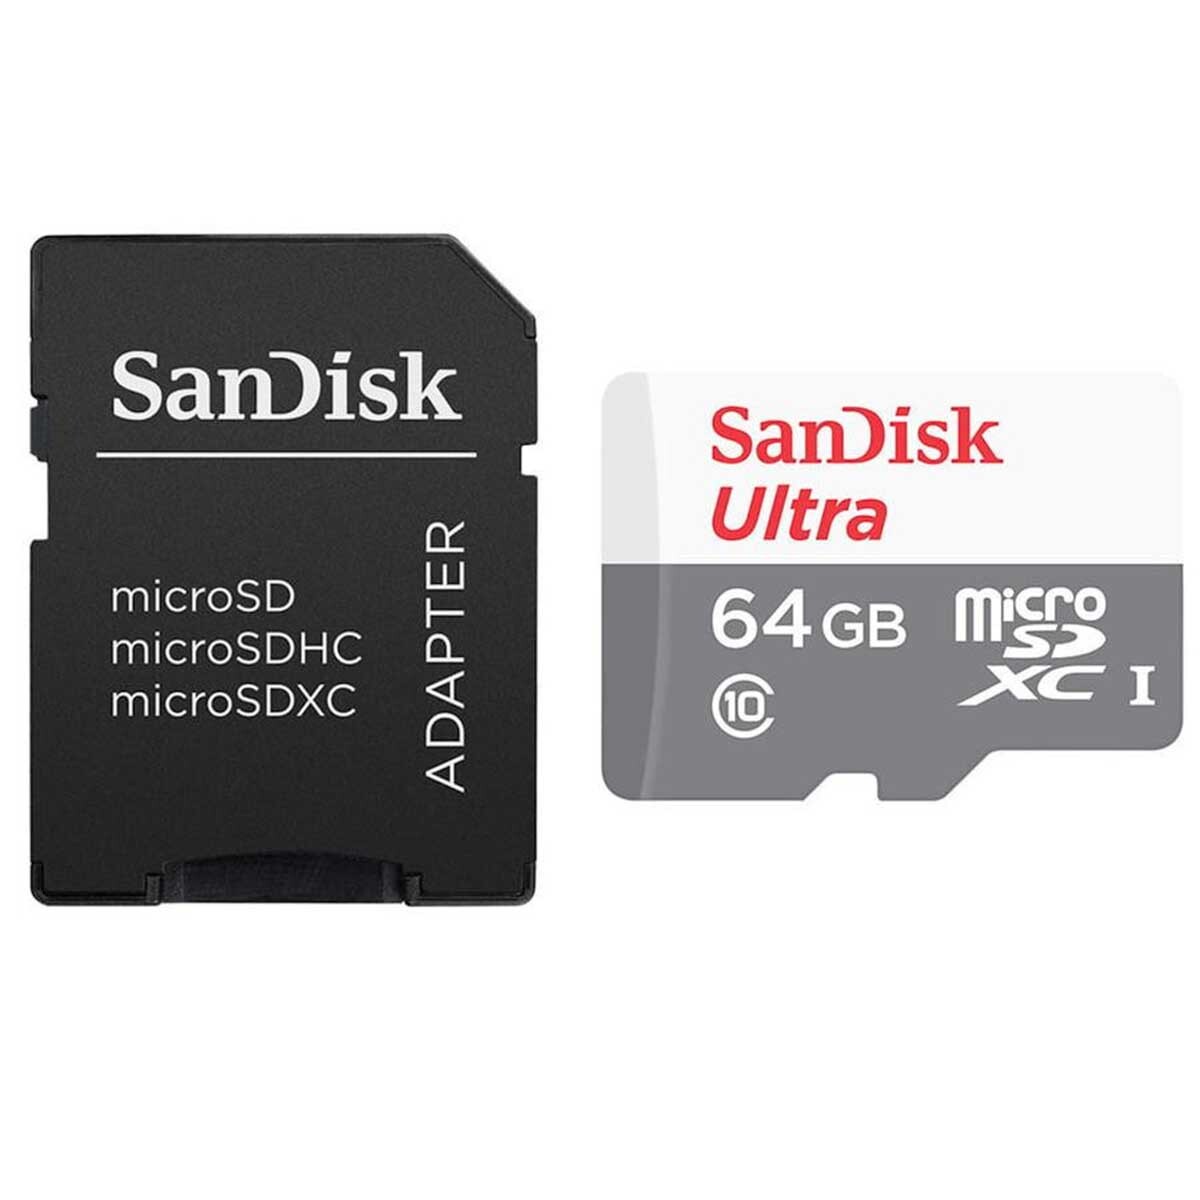 Micro sd sandisk uhs-i ultra 64gb clase 10 100mb/s + adaptador sd 